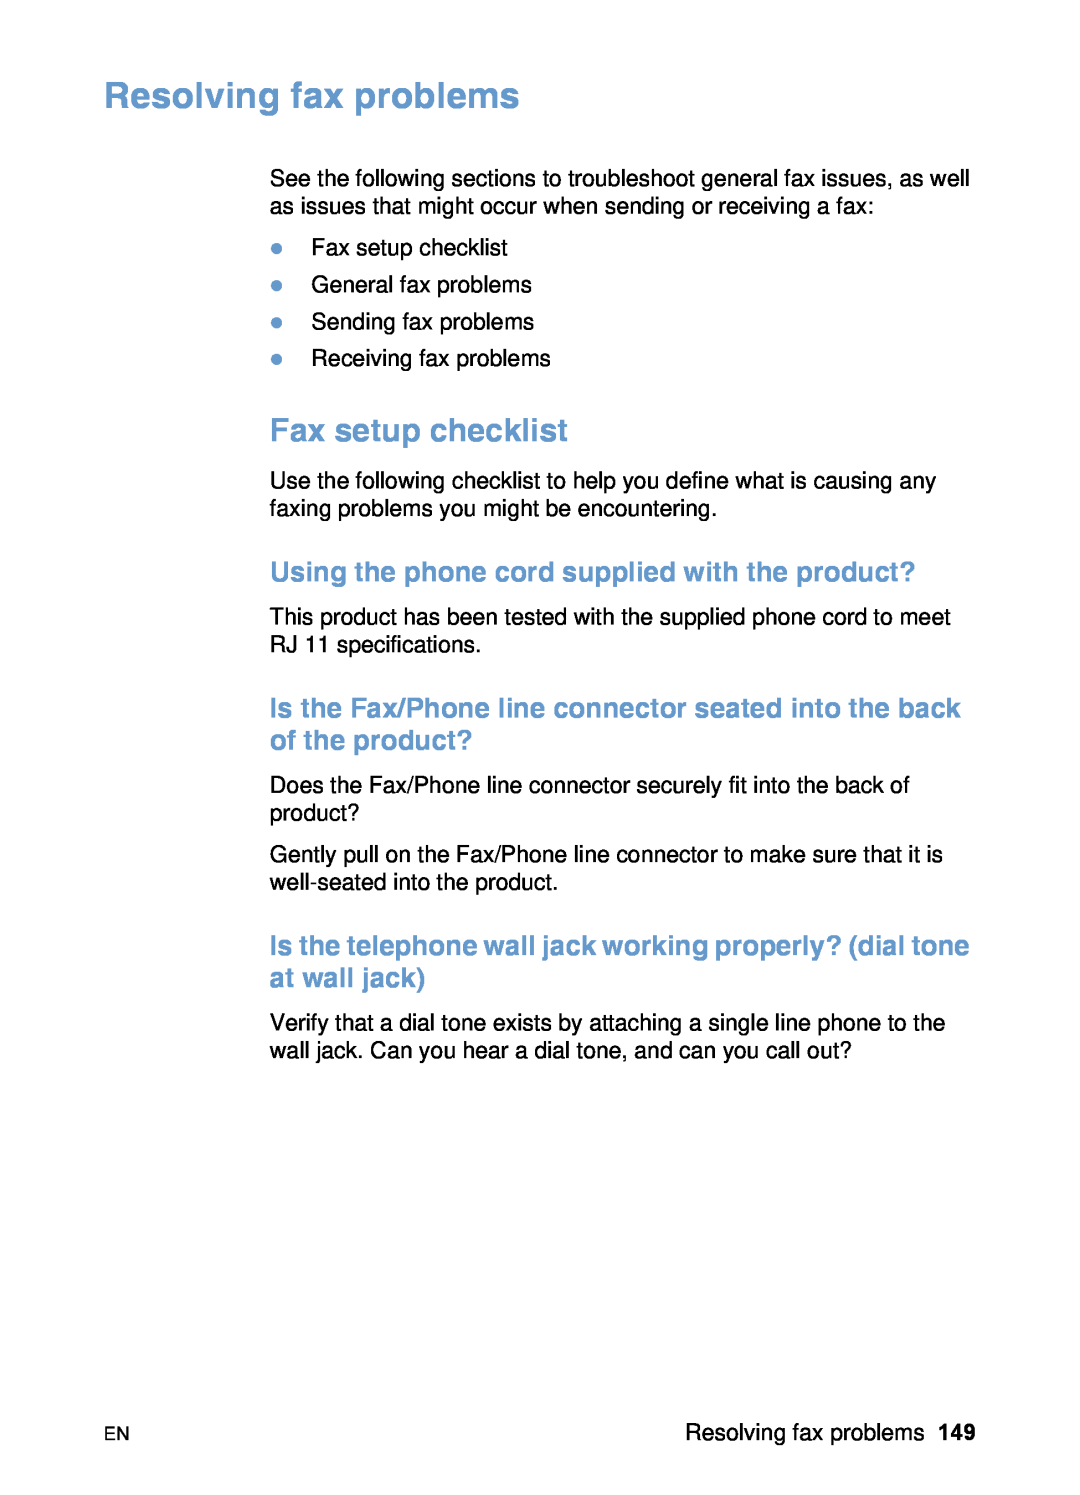 HP 3200 manual Resolving fax problems, Fax setup checklist, Using the phone cord supplied with the product? 